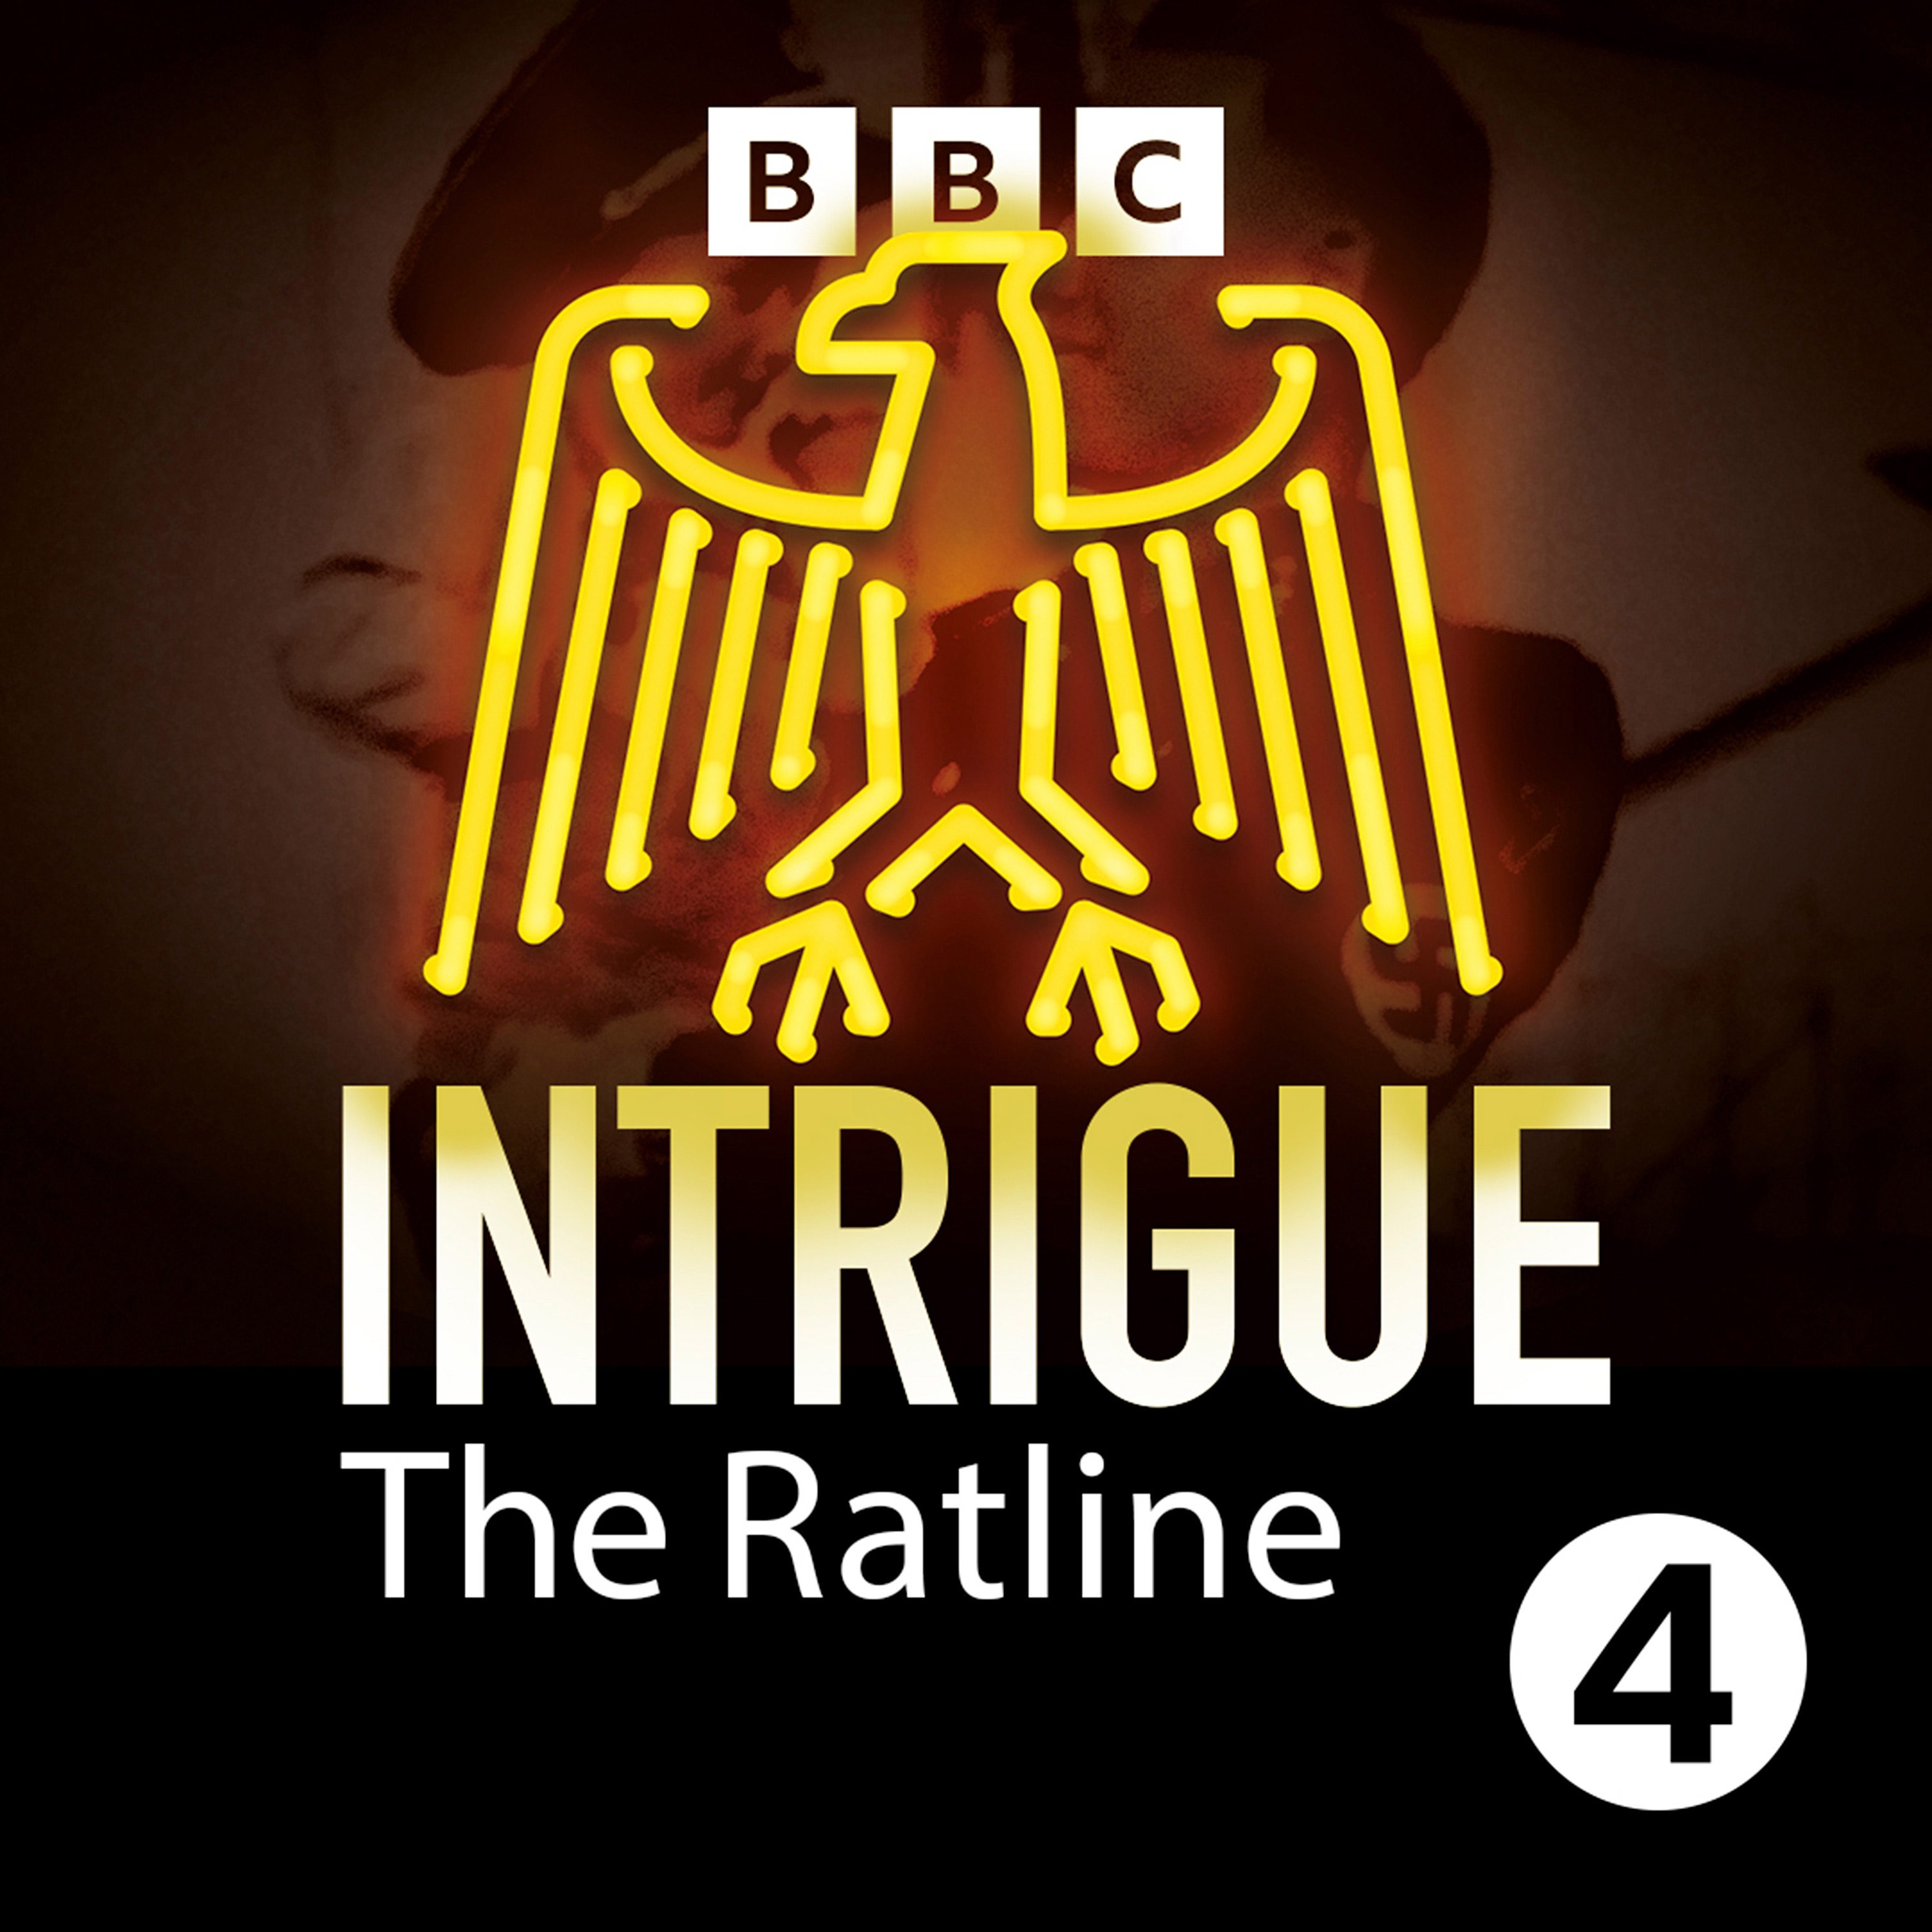 Welcome to Intrigue: The Ratline